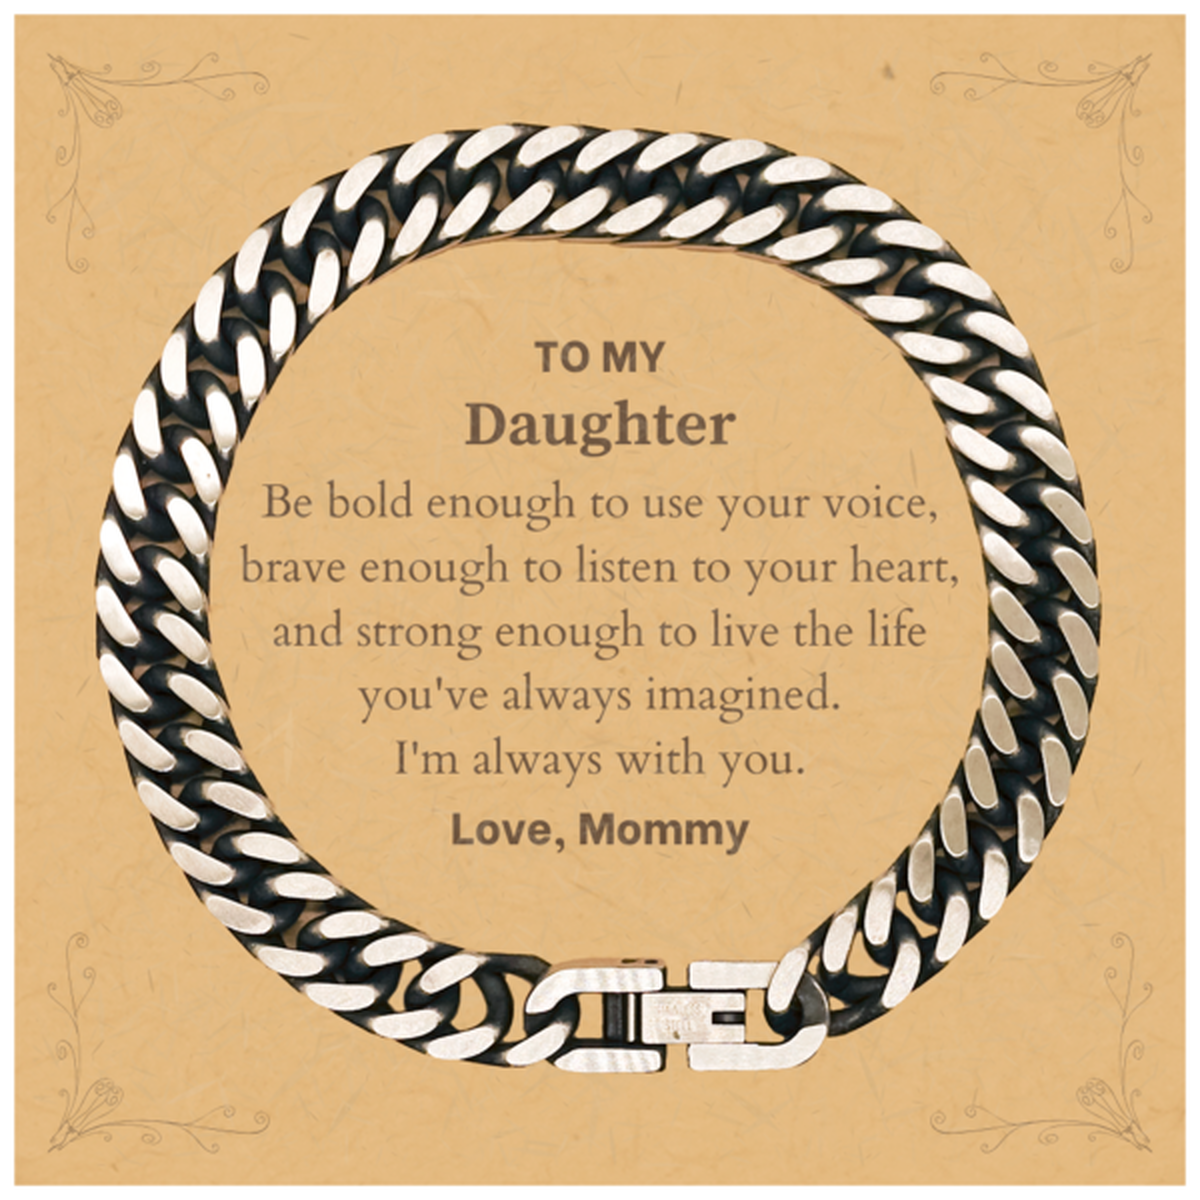 Keepsake Daughter Cuban Link Chain Bracelet Gift Idea Graduation Christmas Birthday Daughter from Mommy, Daughter Be bold enough to use your voice, brave enough to listen to your heart. Love, Mommy